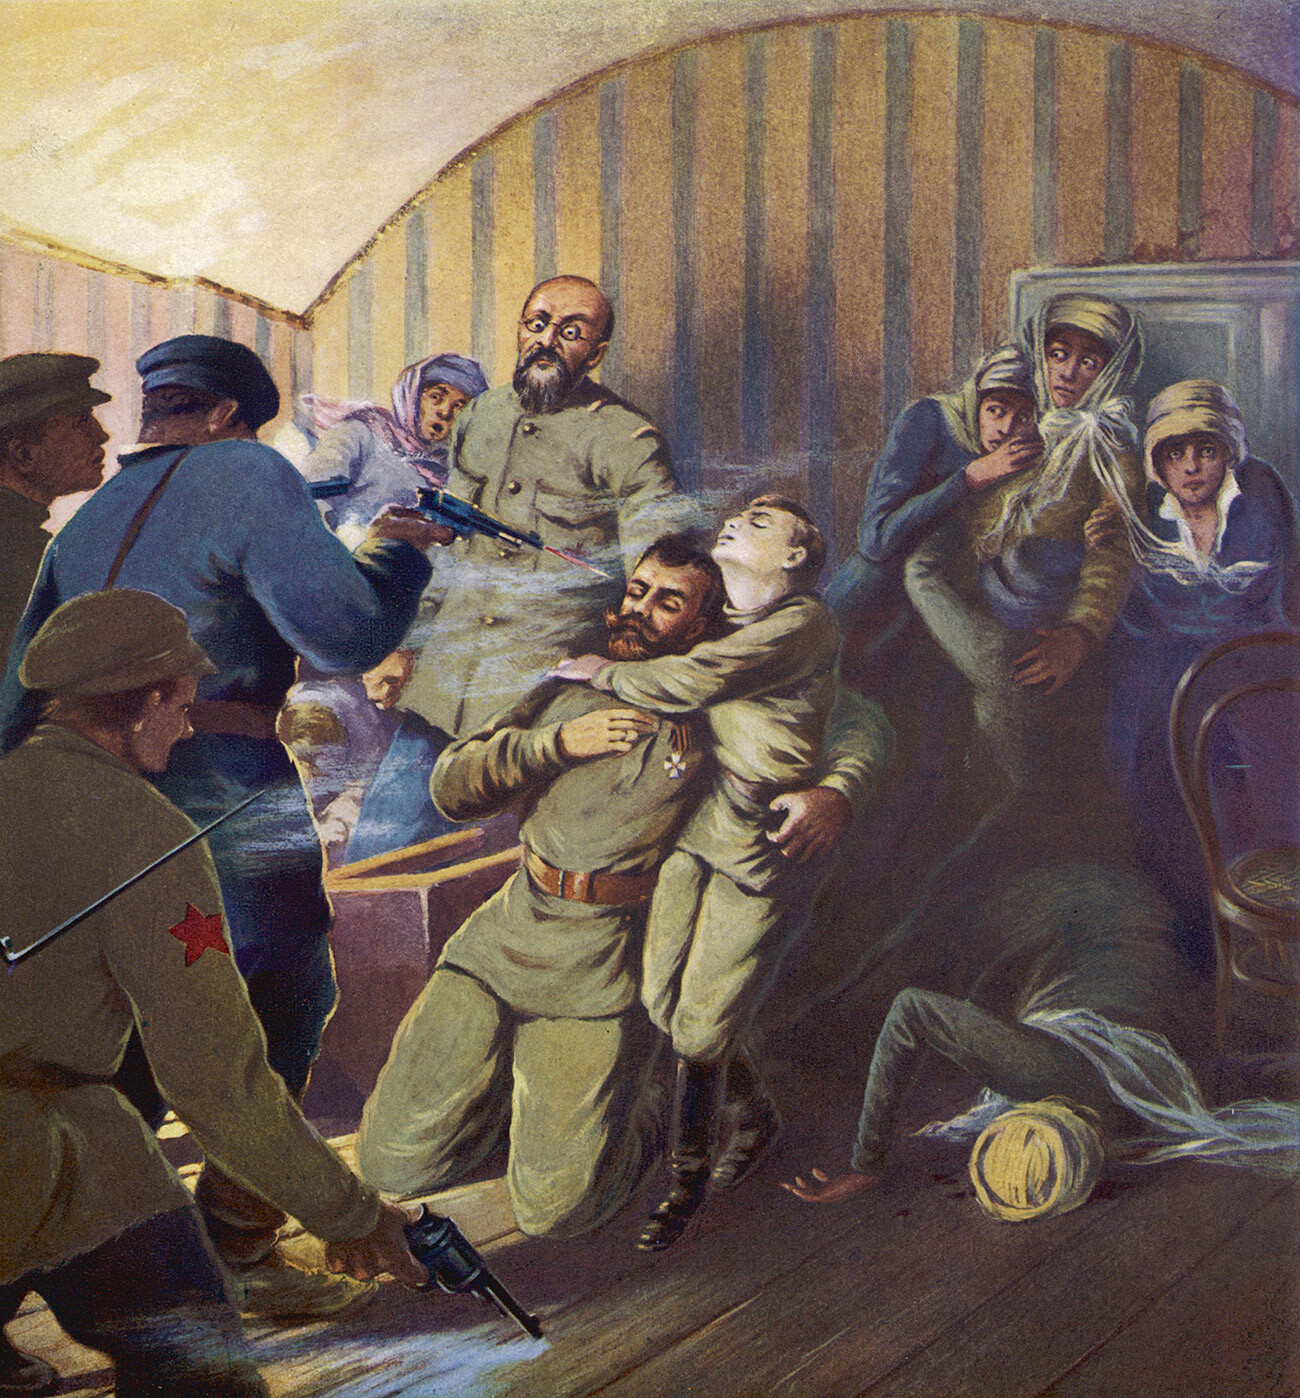 The execution of Tsar Nicholas II and his family in Yekaterinburg.